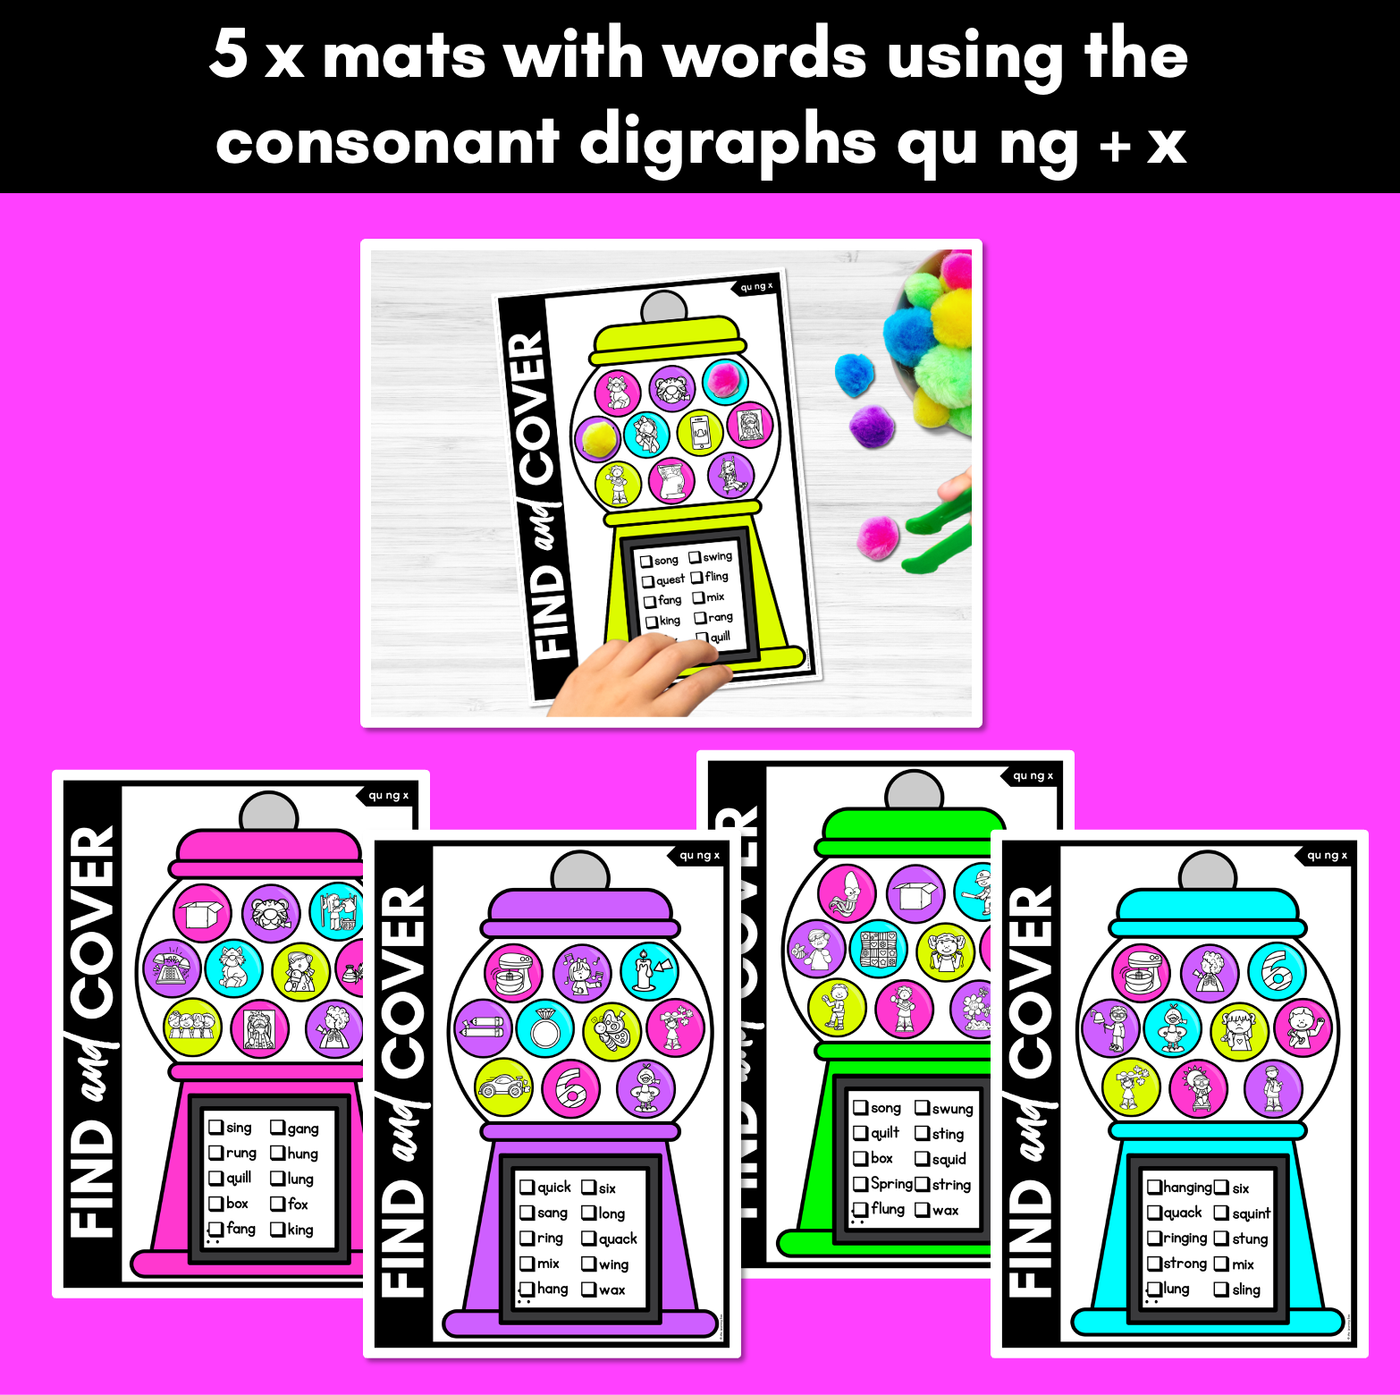 QU NG + X Words - Find & Cover No Prep Phonics Game for Consonant Digraphs